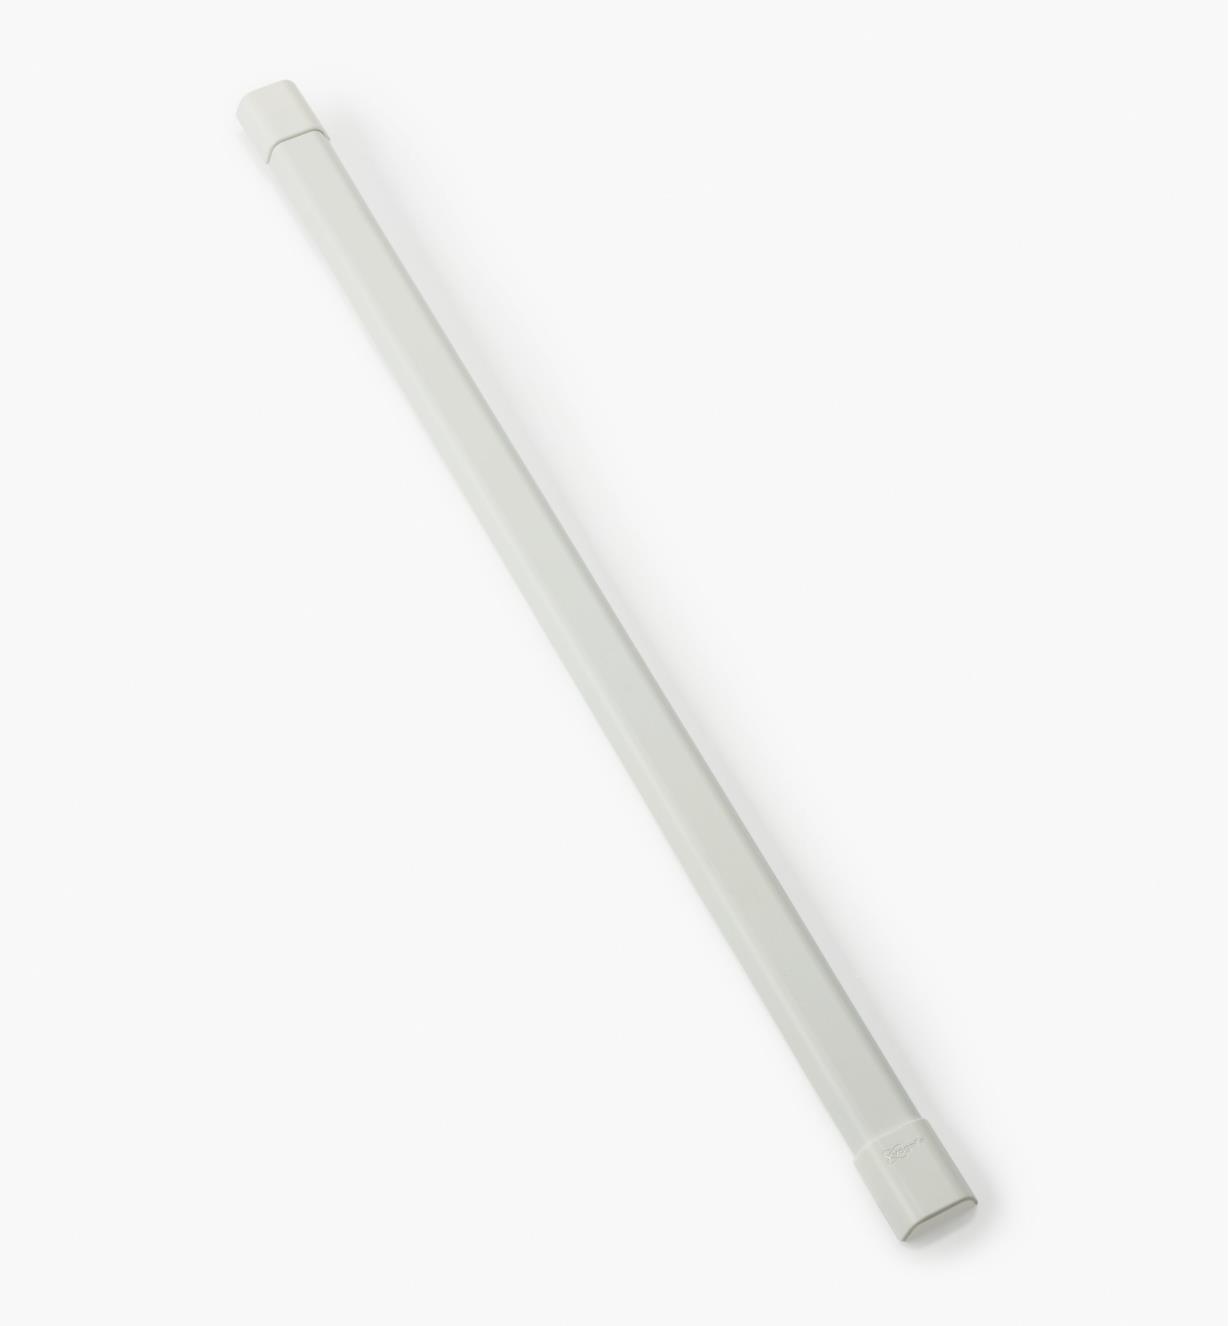 00K6780 - 1 3/4" x 35" Aluminum Cable Cover, White